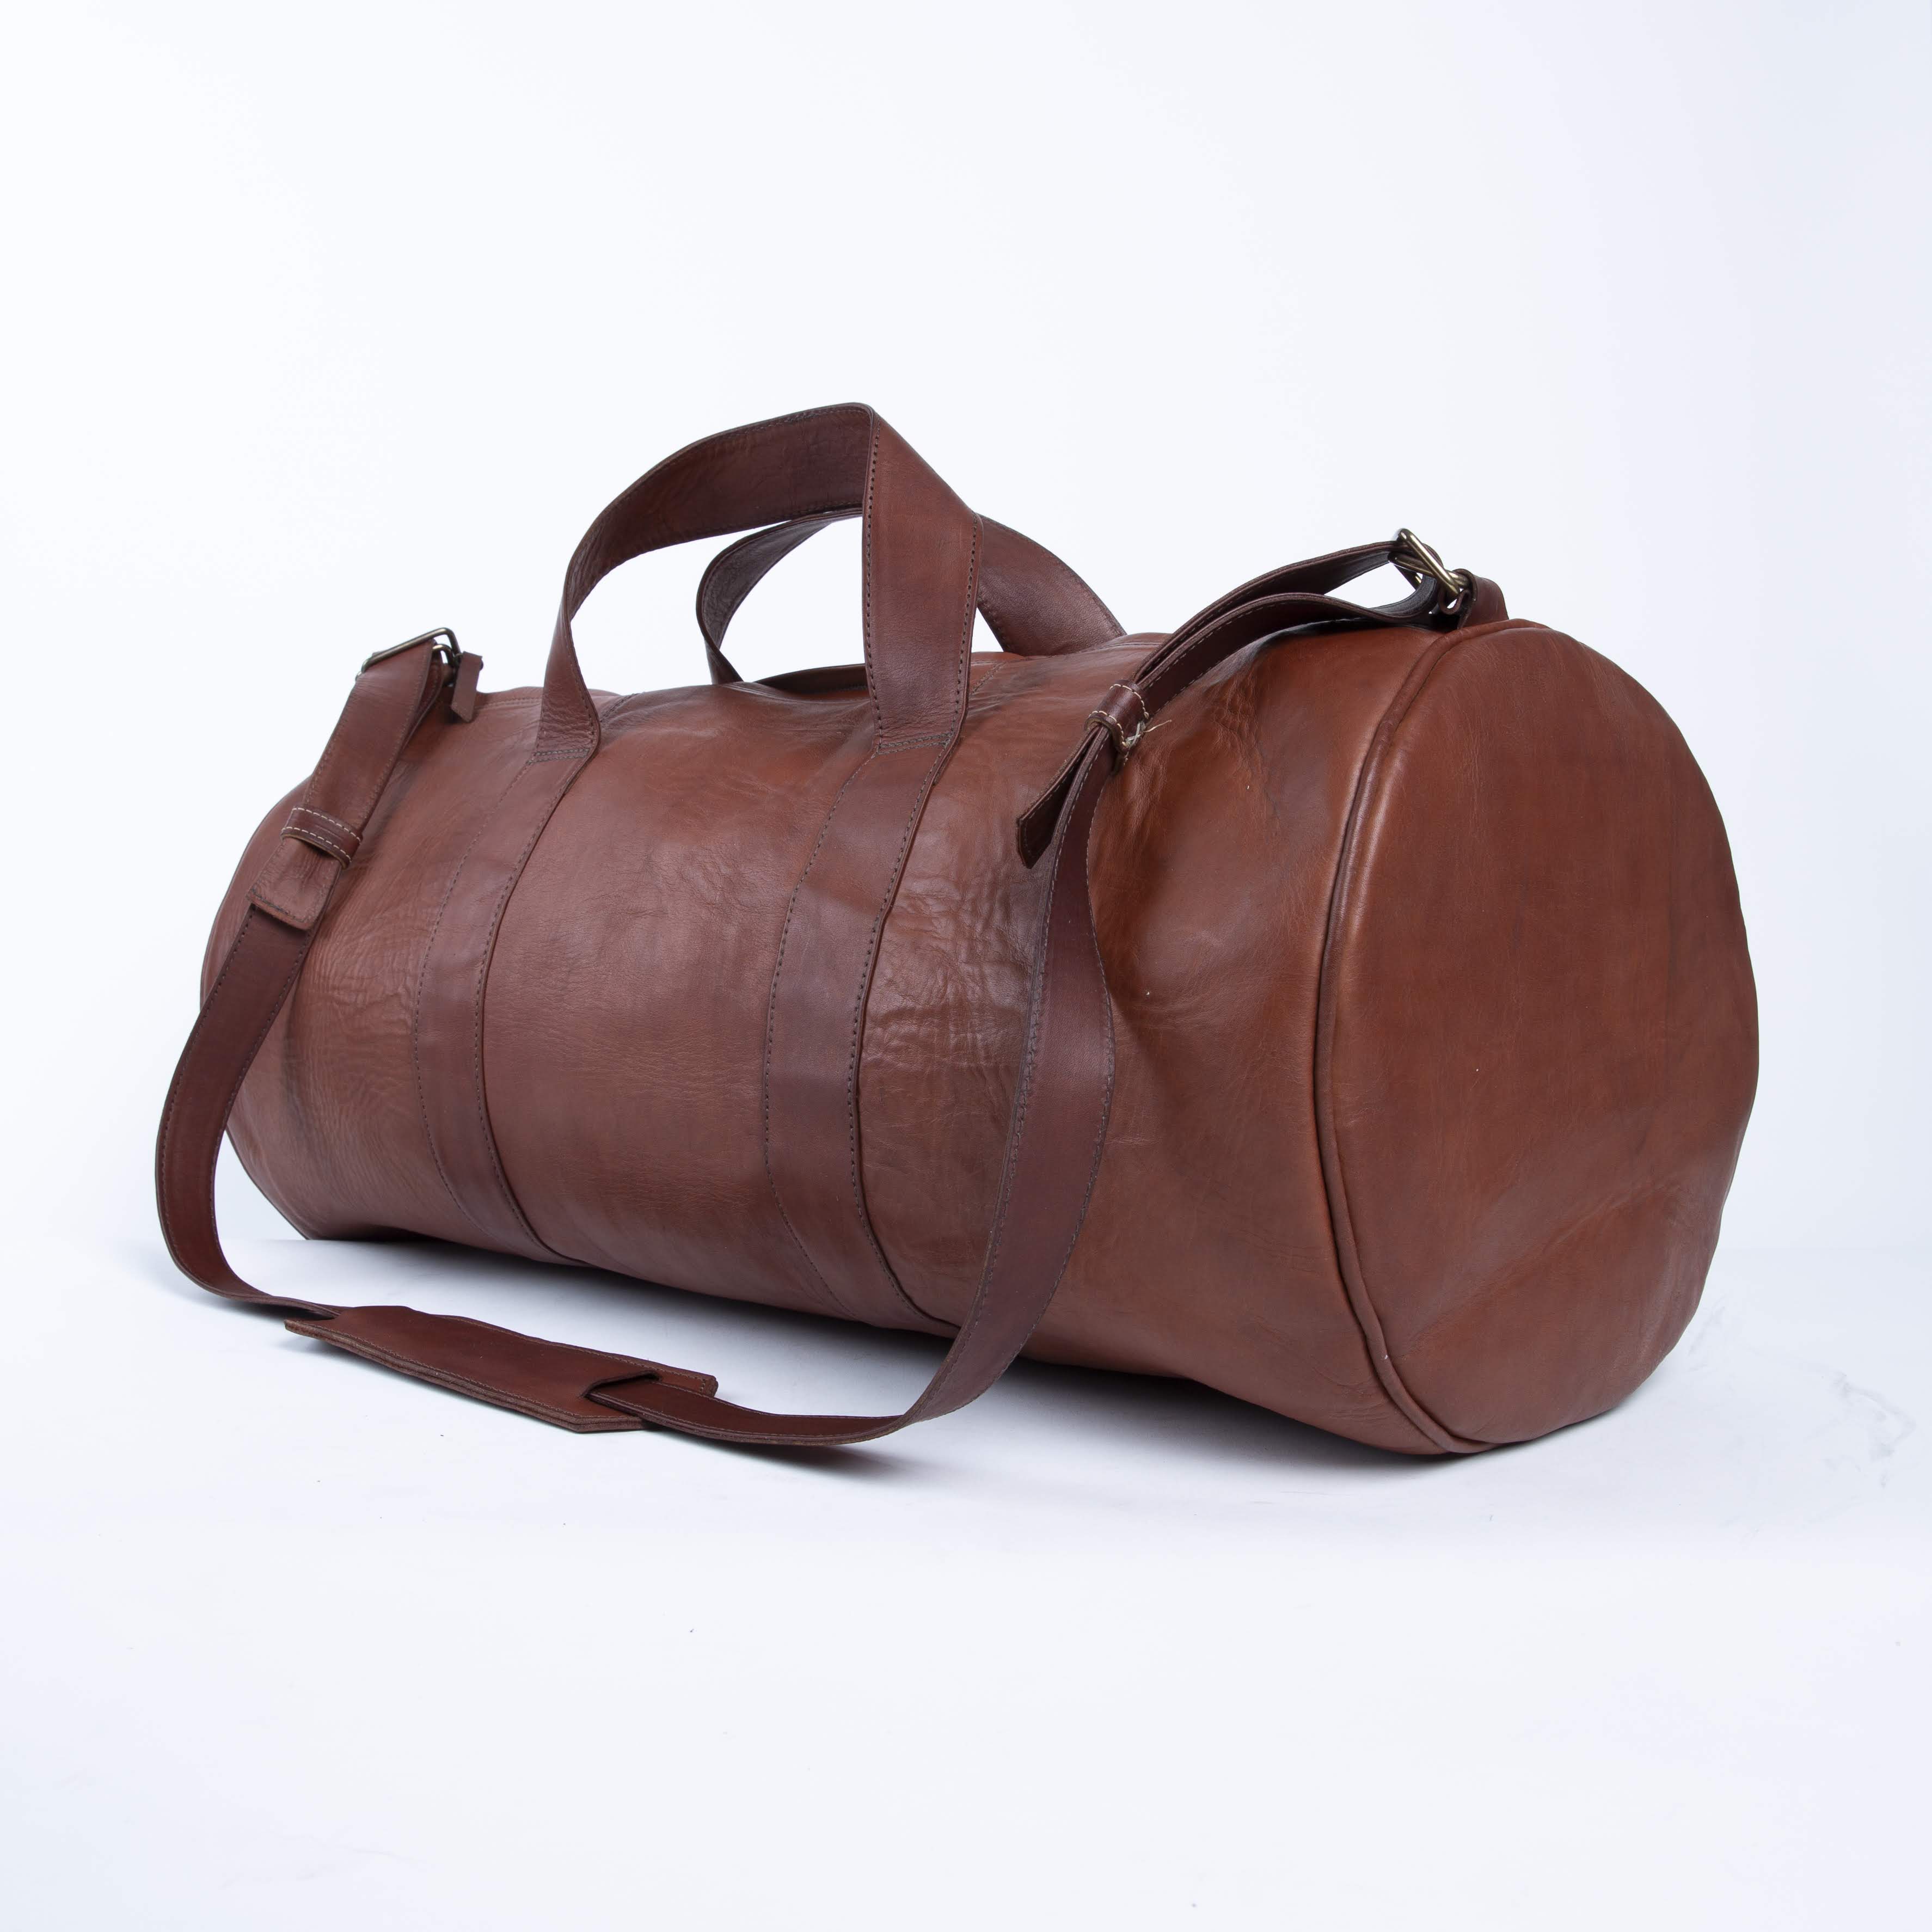 Bati | Brown Leather Duffel Bag | Handmade Leather Goods from Paraguay | Leather weekender, leather duffel bag, leather duffels, leather accessories, bati